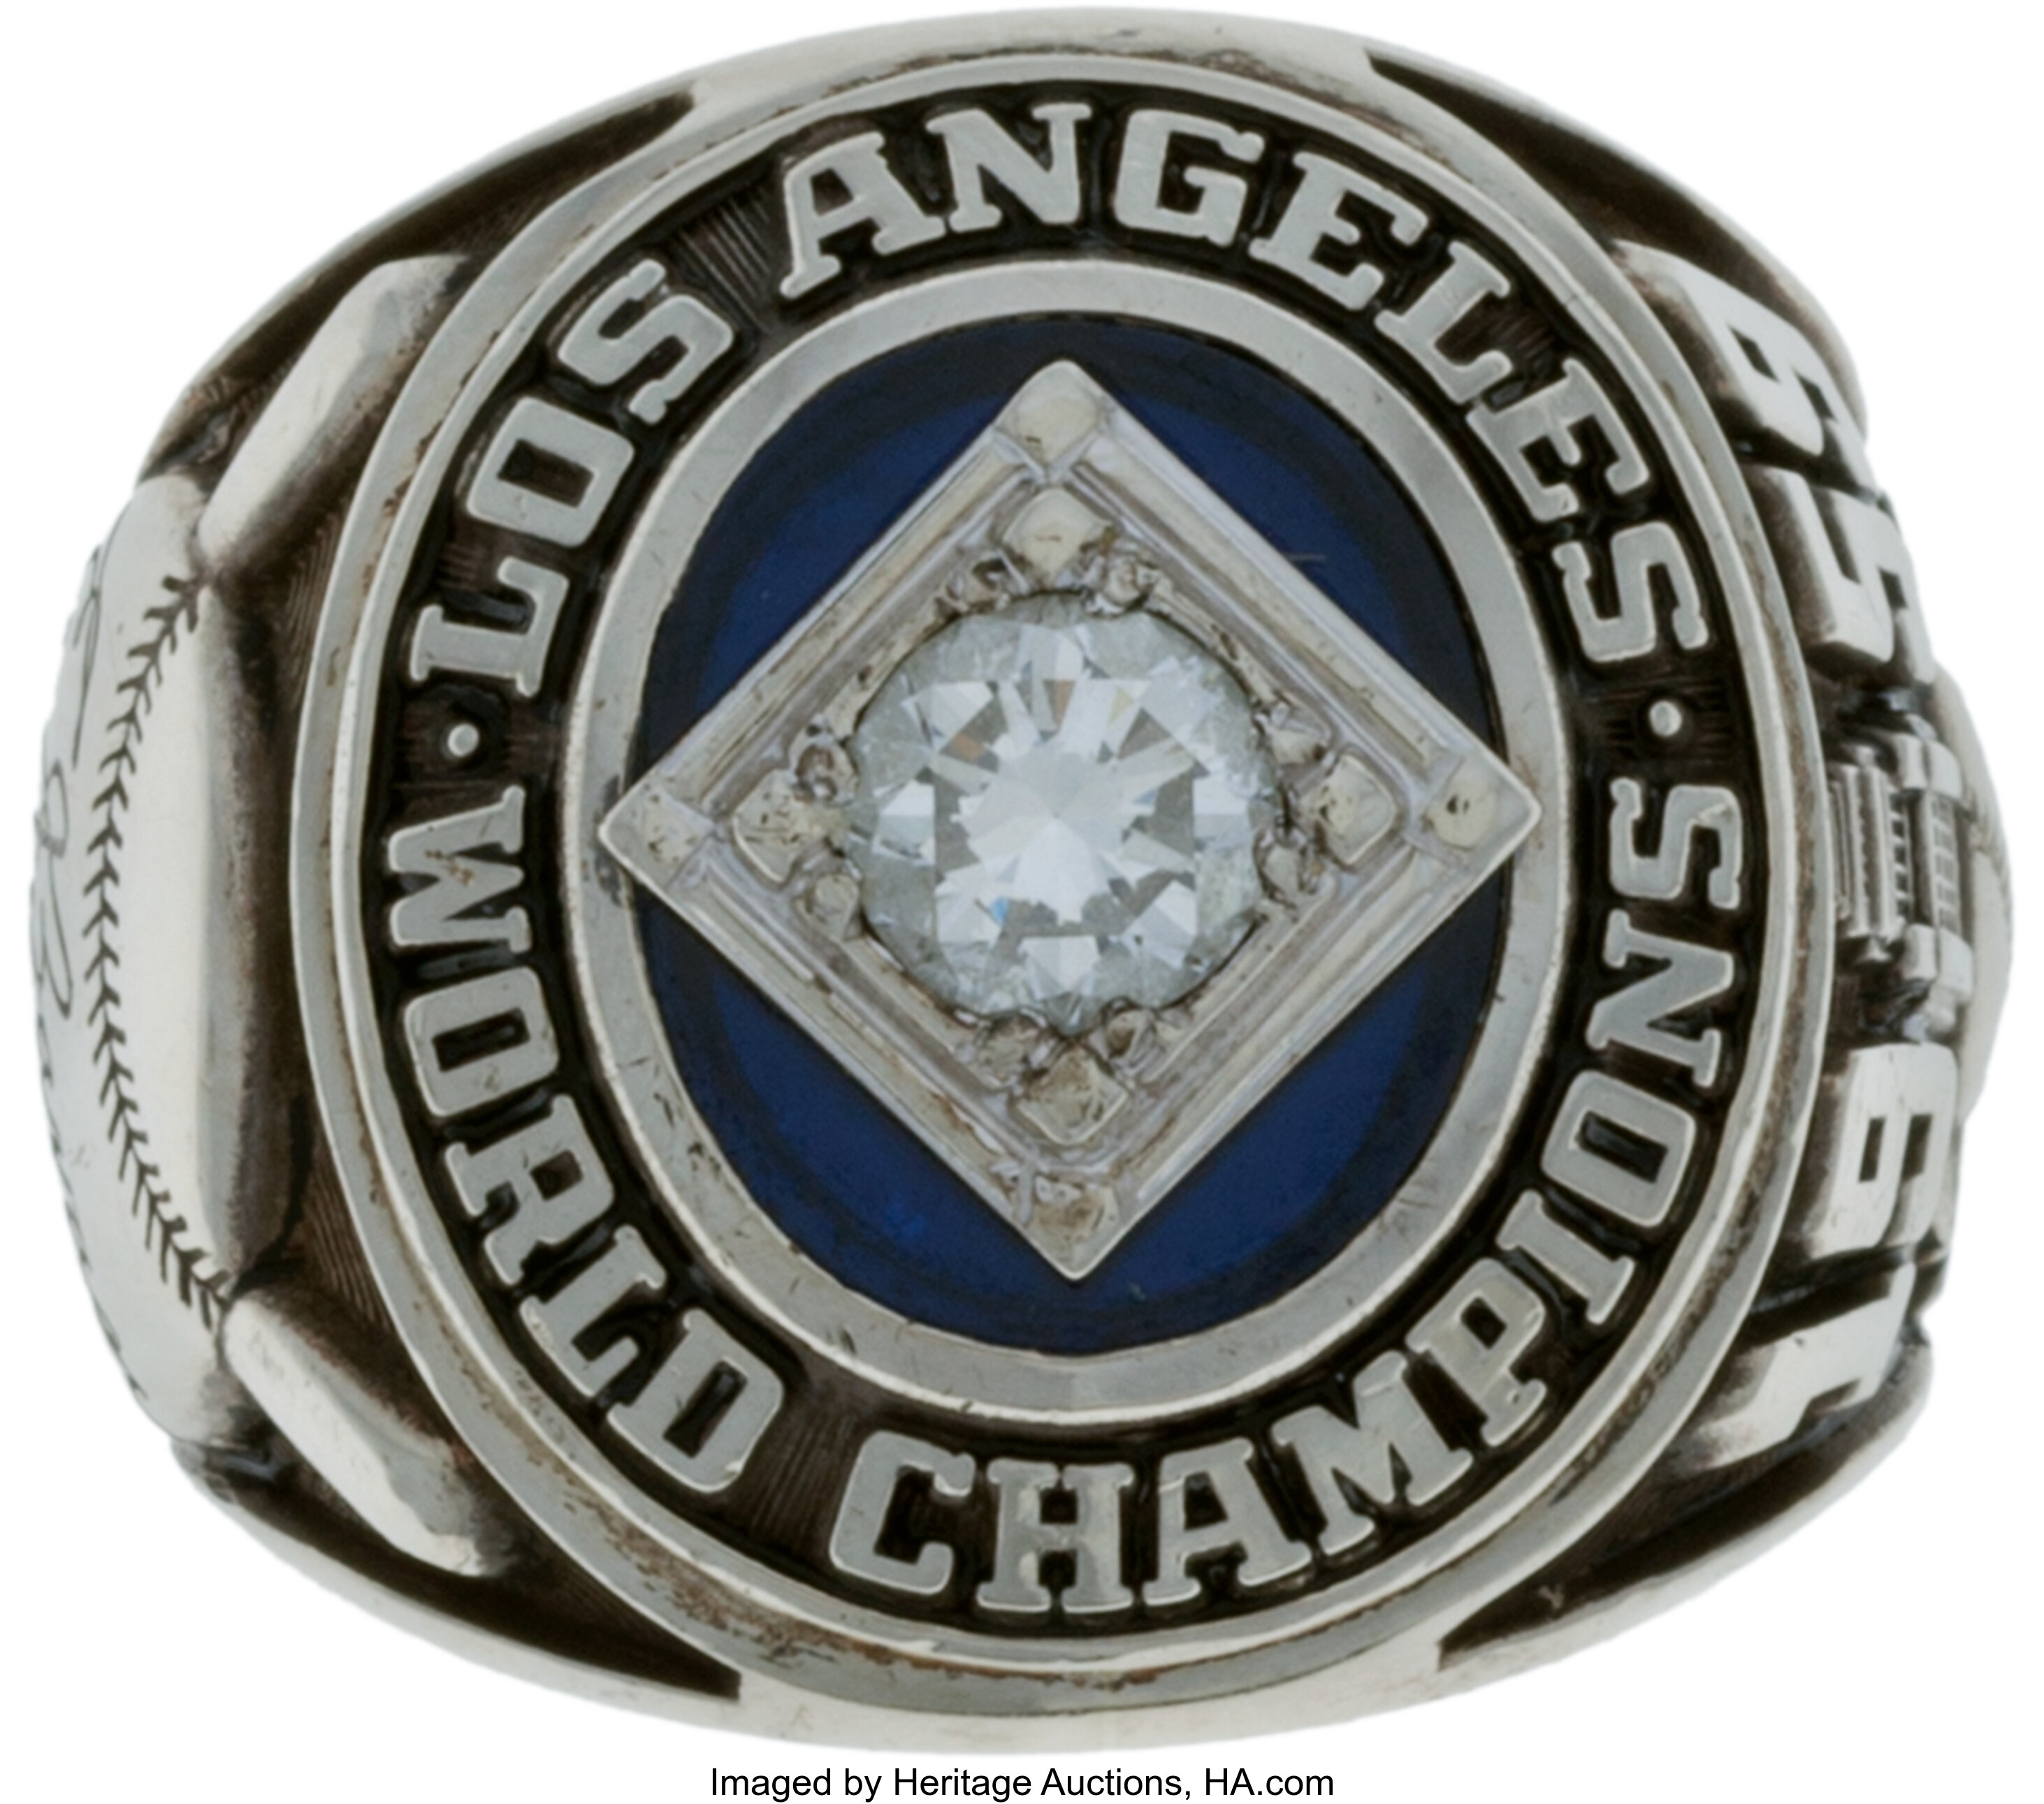 1959 Los Angeles Dodgers World Championship Ring Presented to